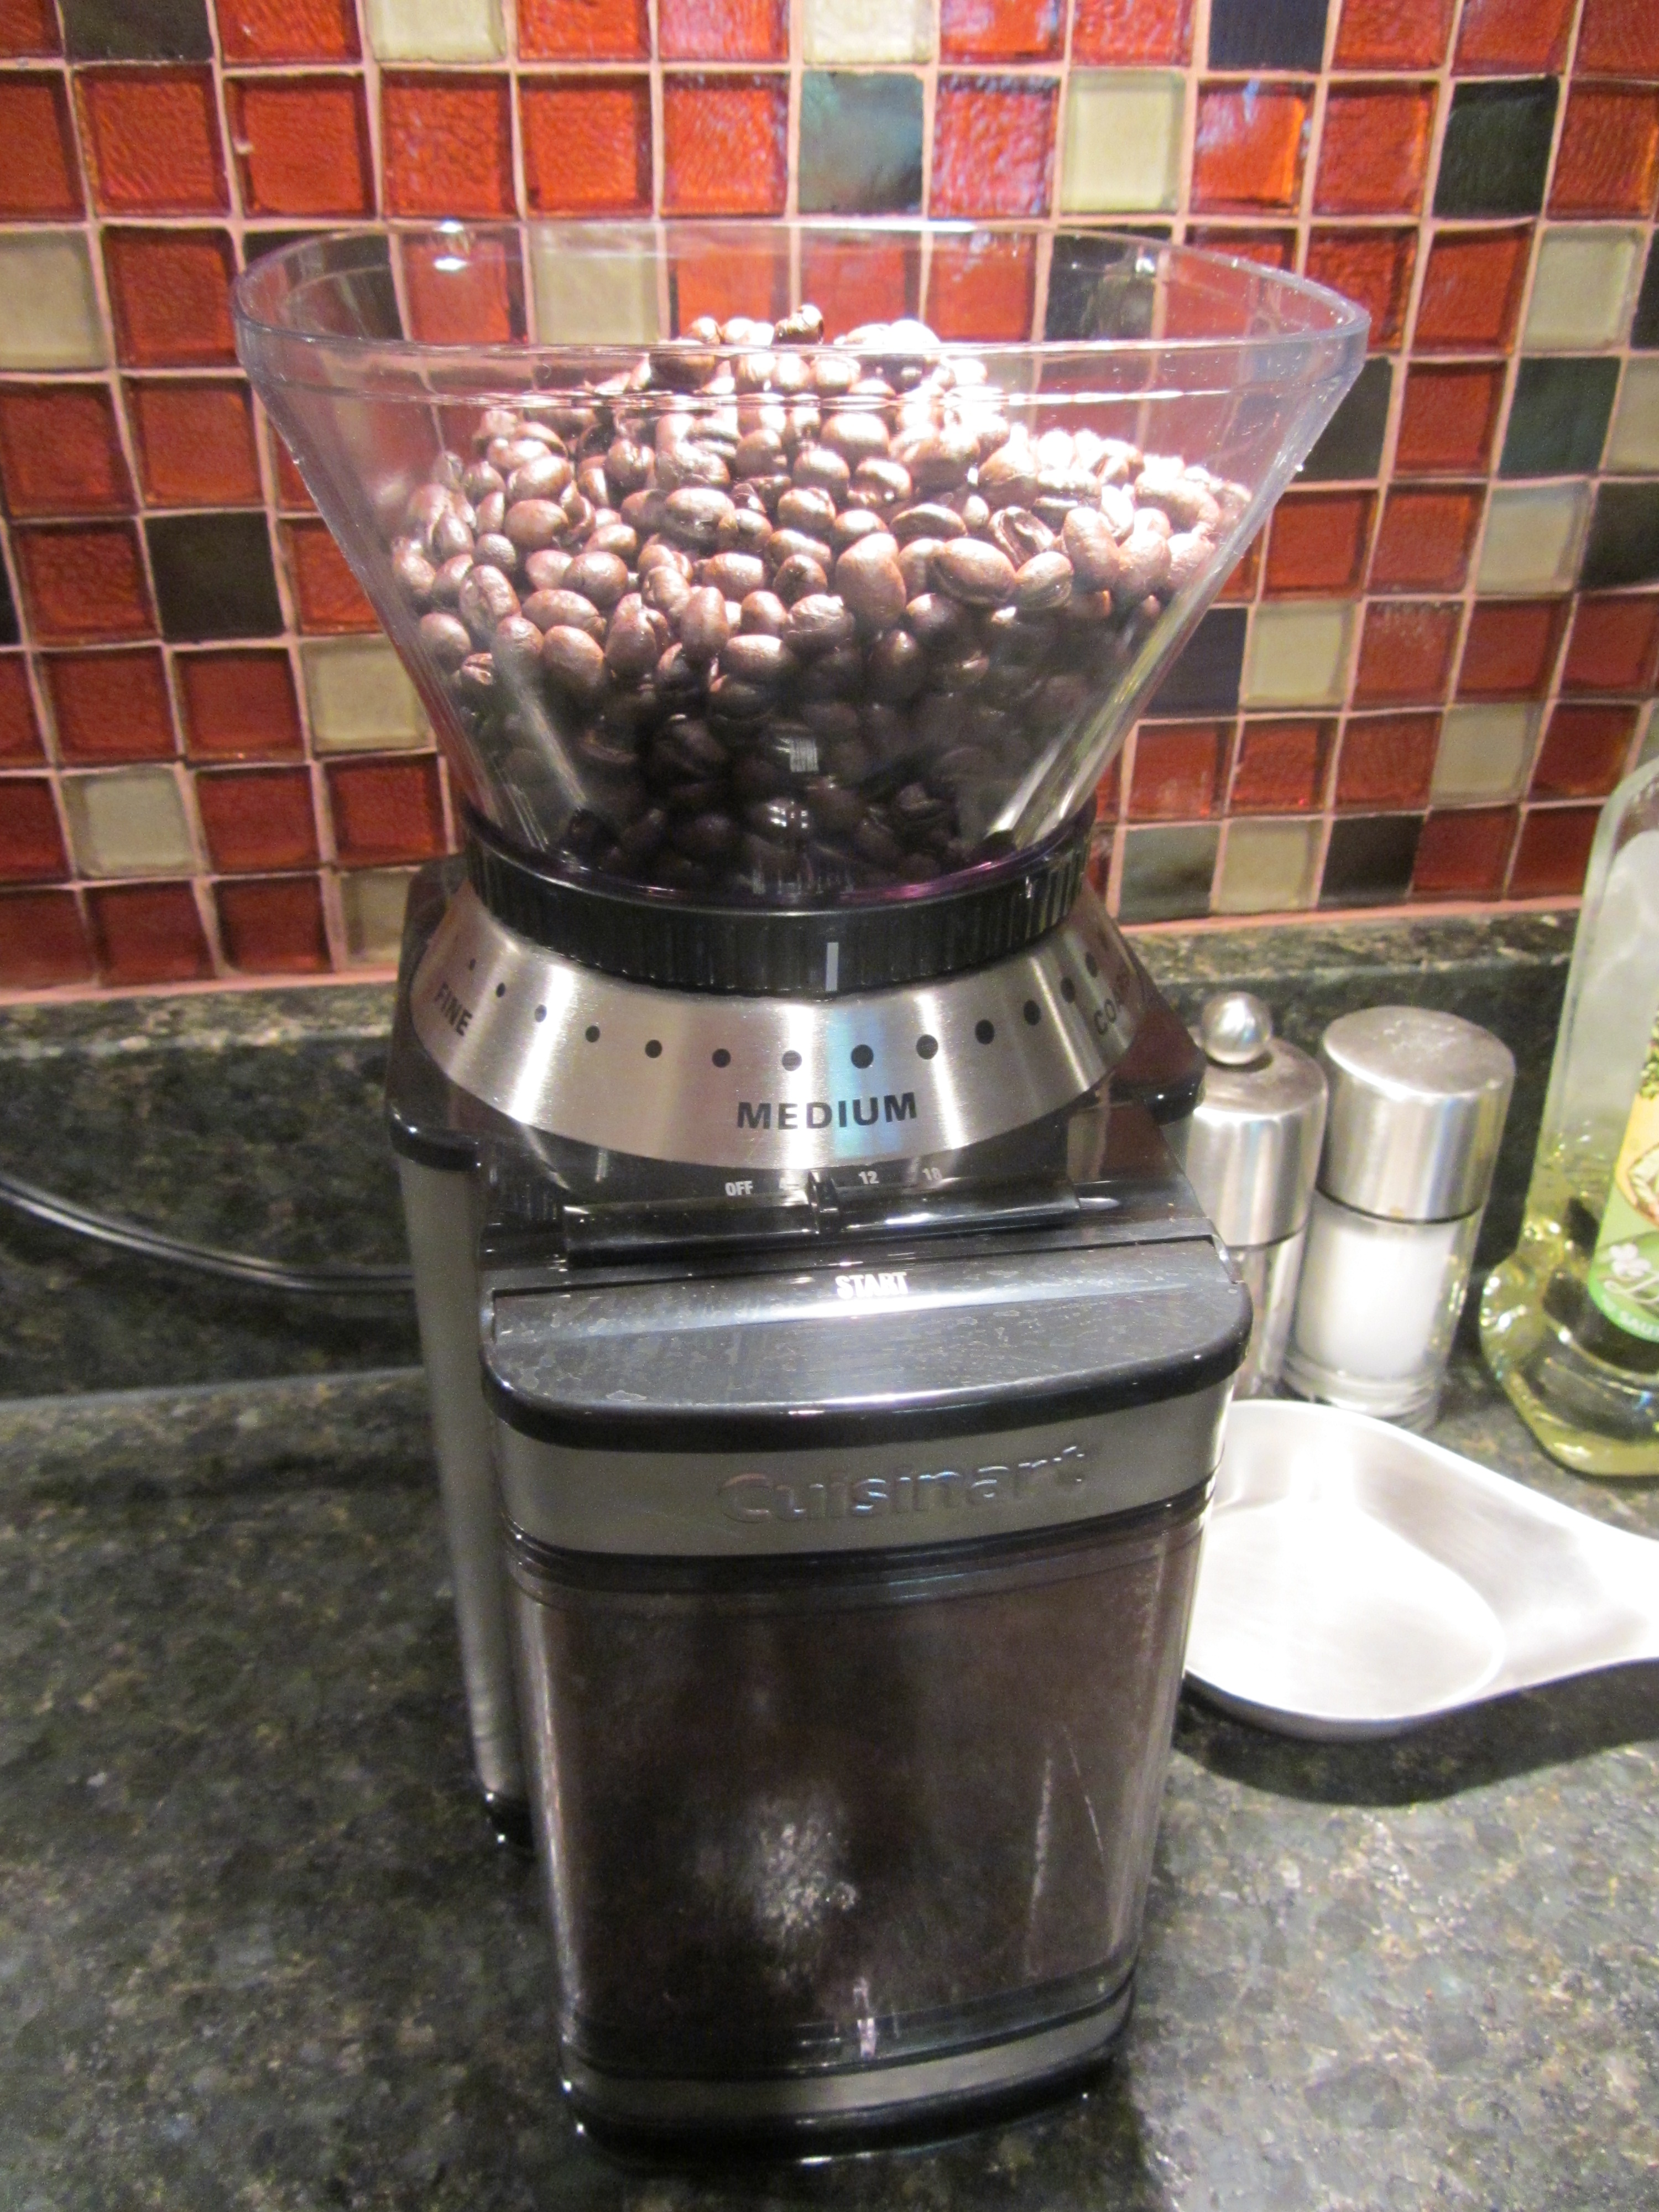 Product Review: Cuisinart DBM-8 Supreme Grind Automatic Burr Mill